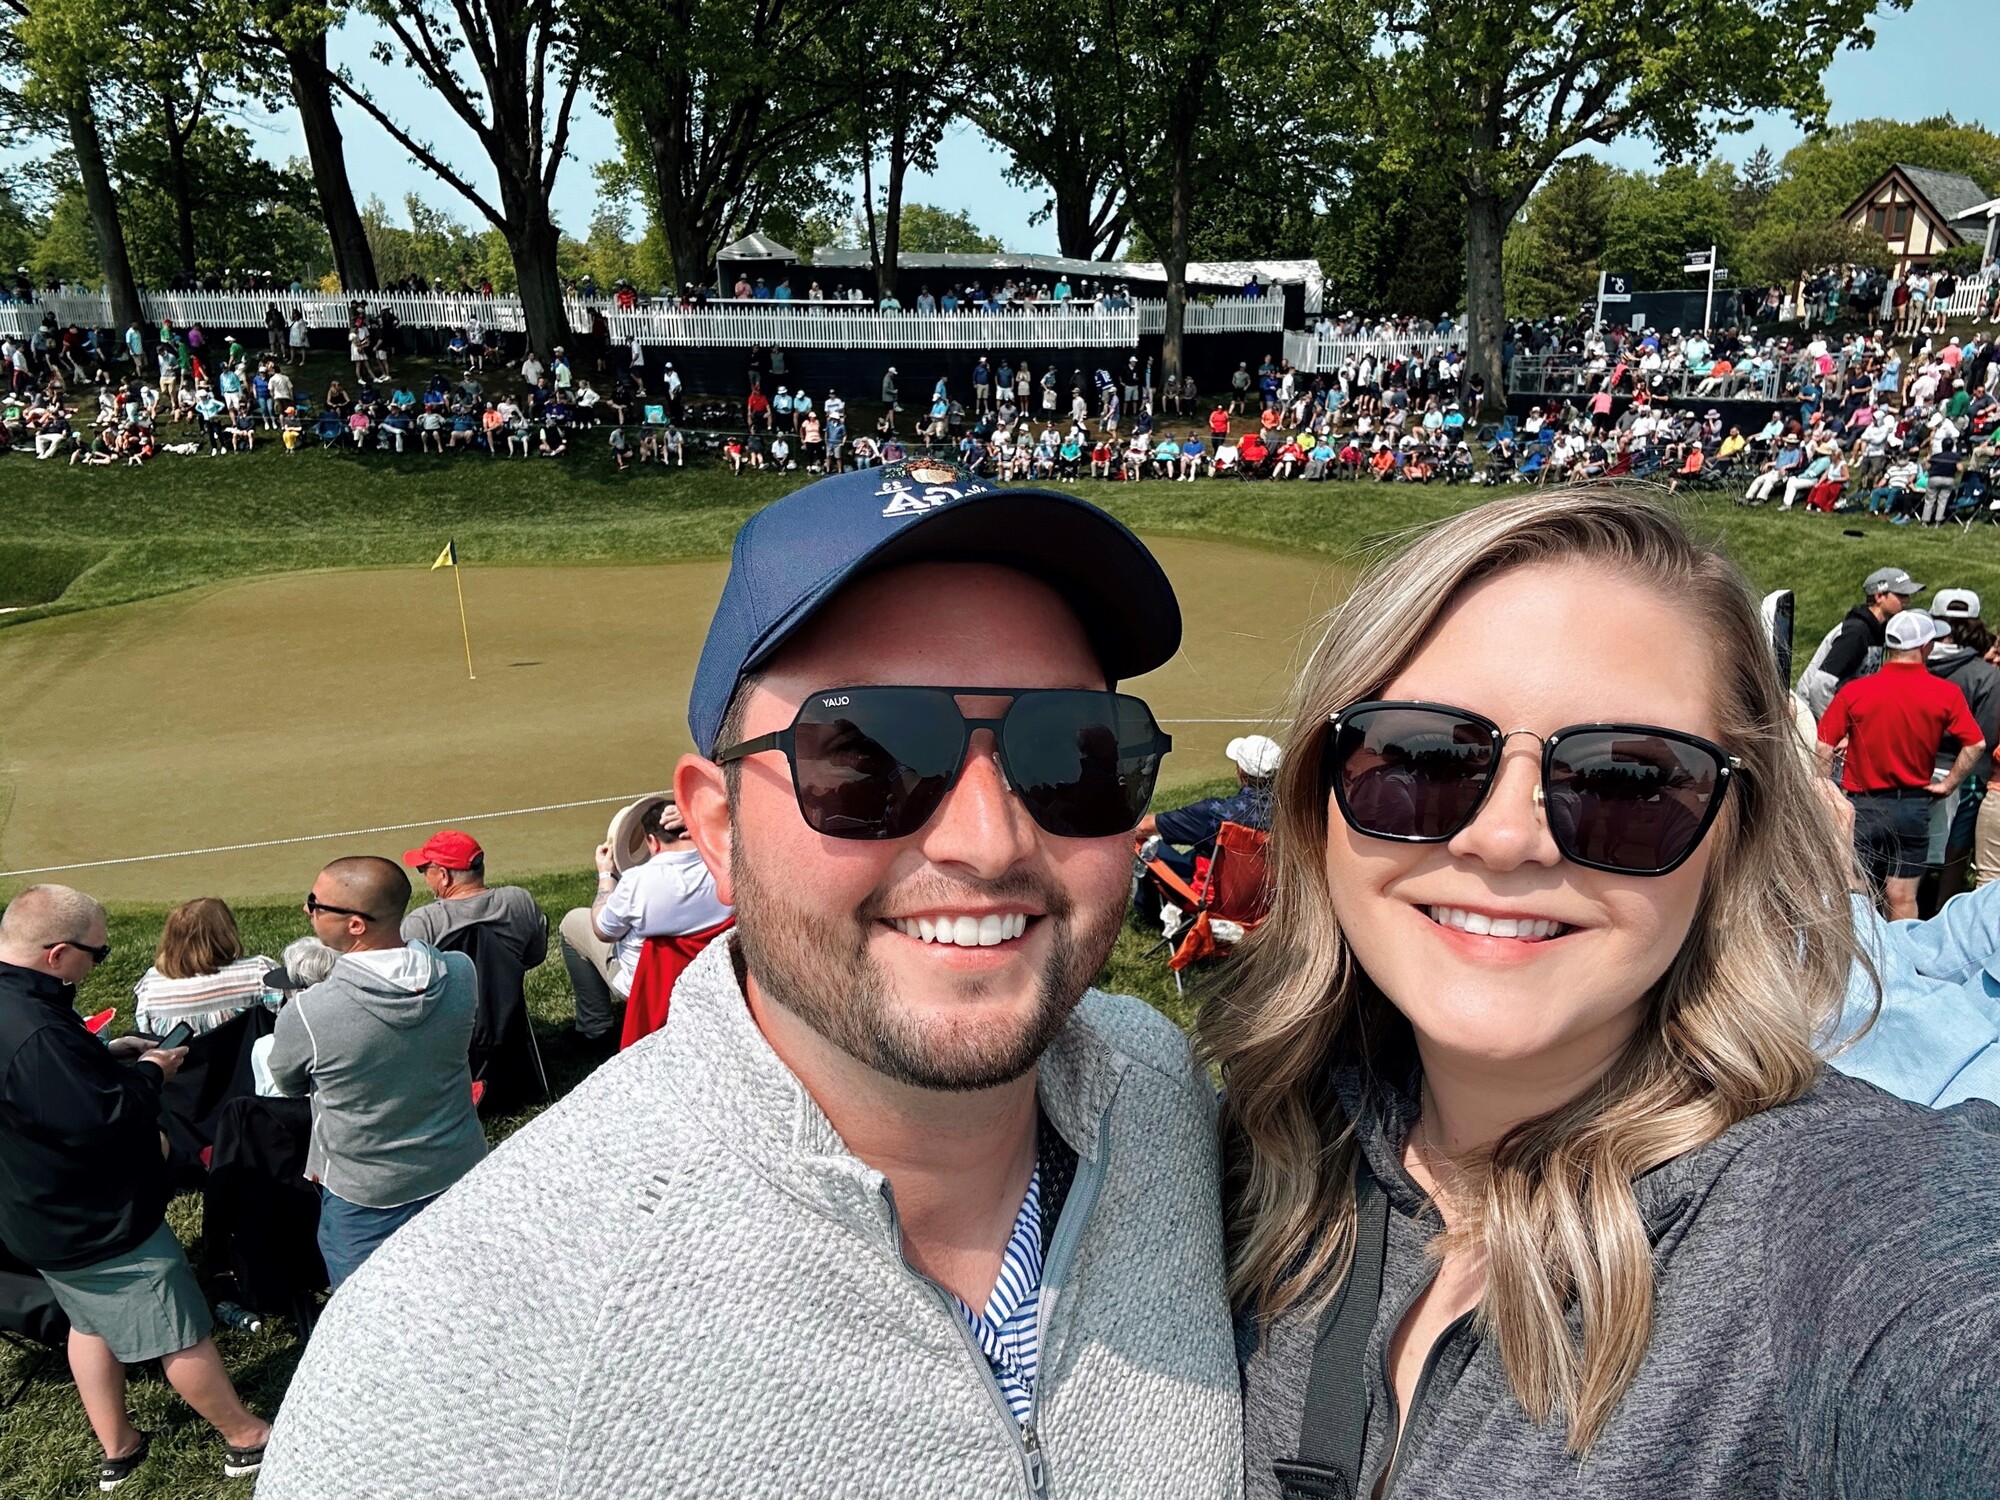 Taylor and her husband Parker at the PGA Championship in Rochester NY